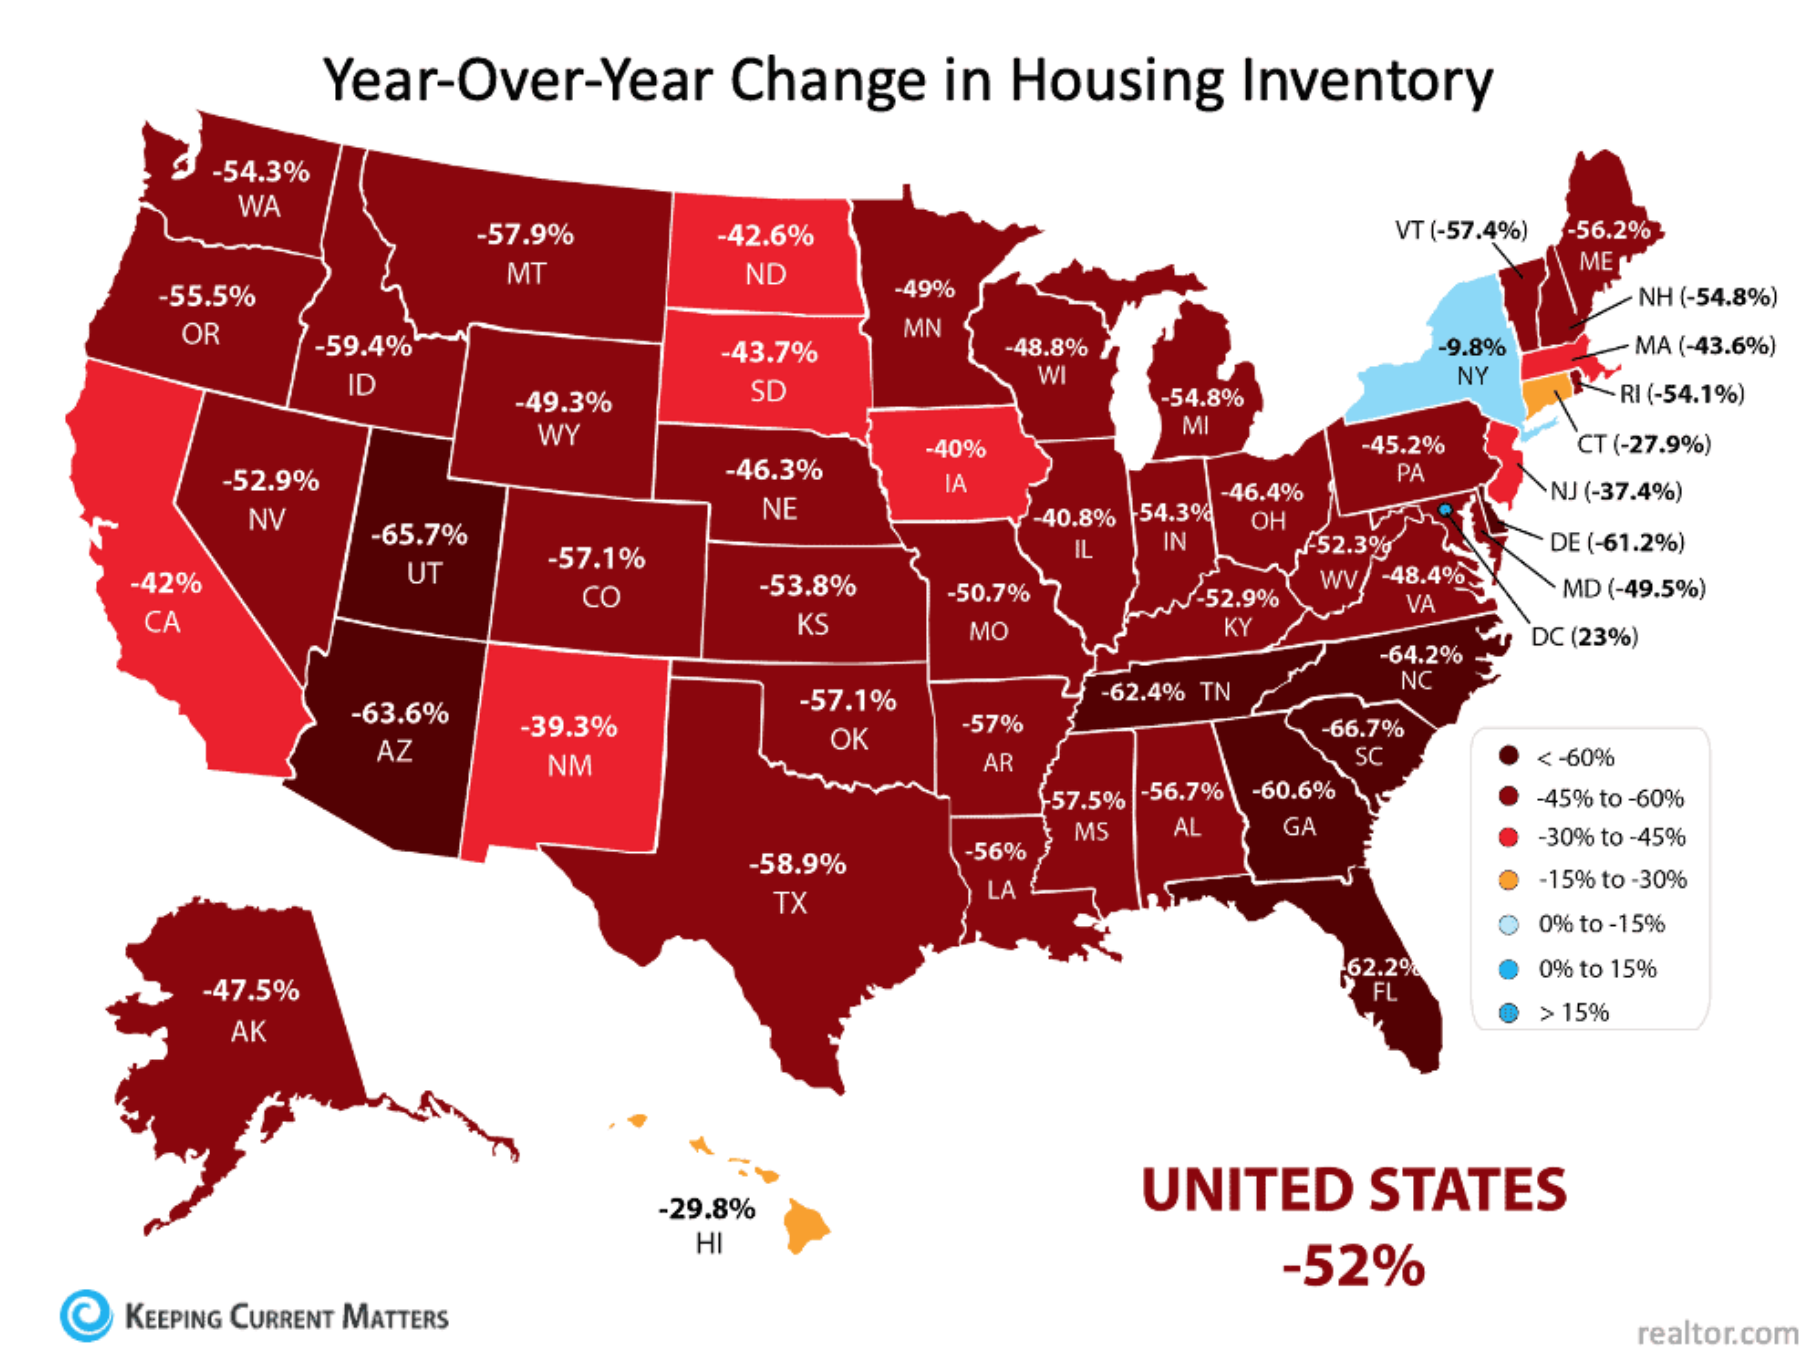 Year-Over-Year Change in Housing Inventory